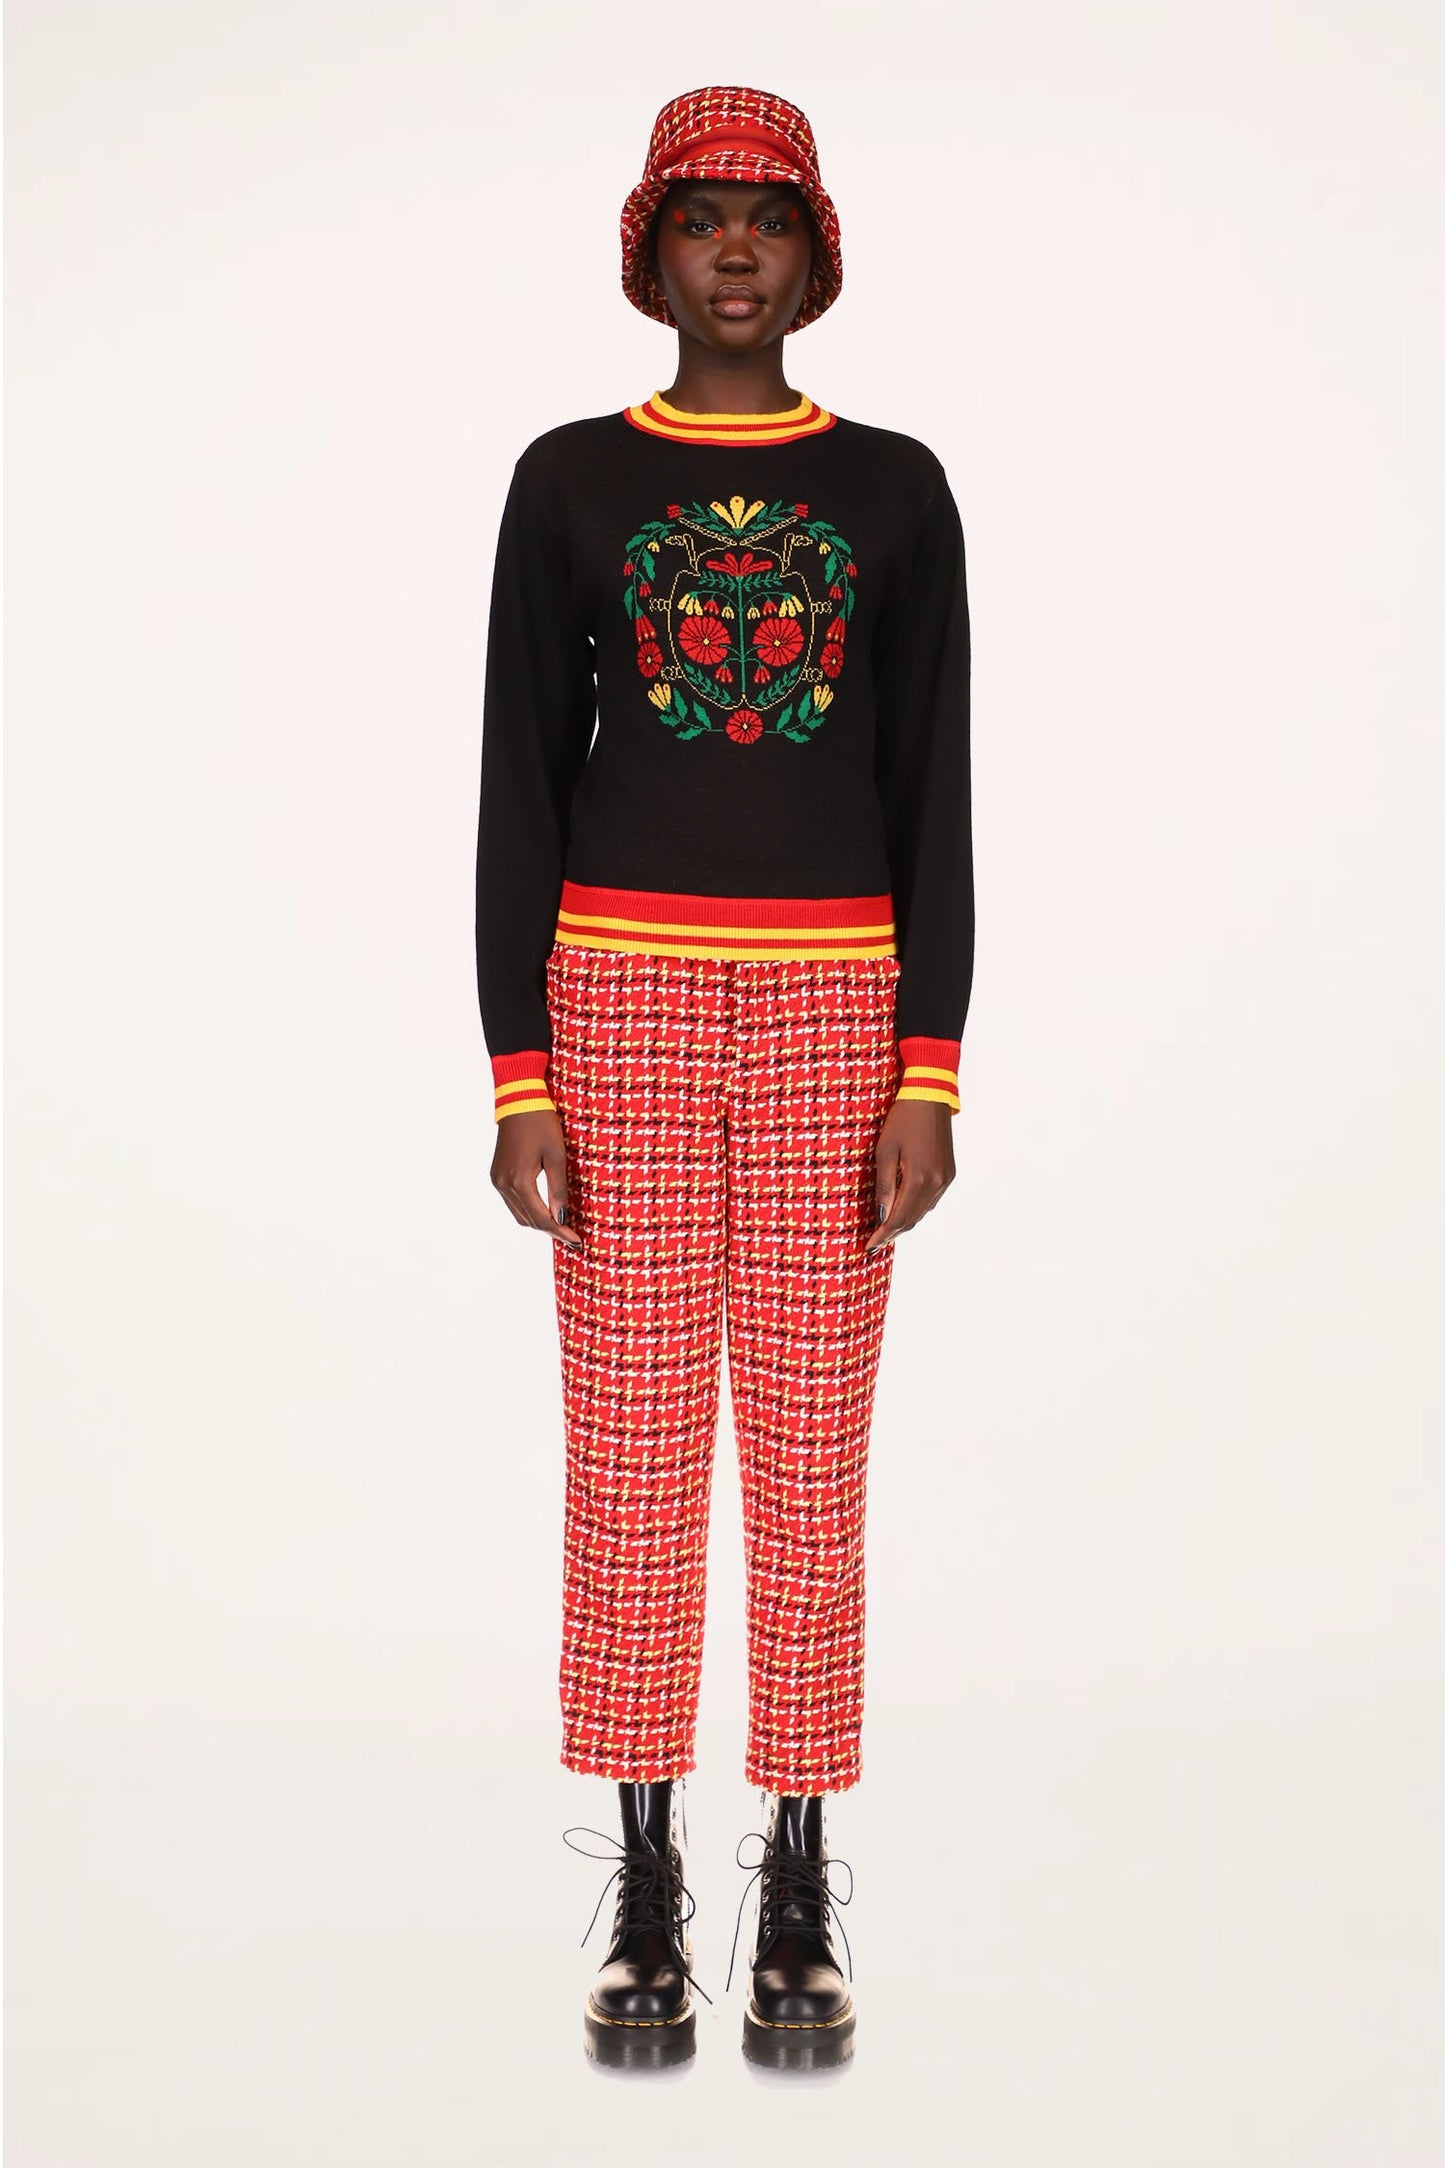  Anna Sui Neo Plaid Pants Red, very colorful pant in a red orange hue